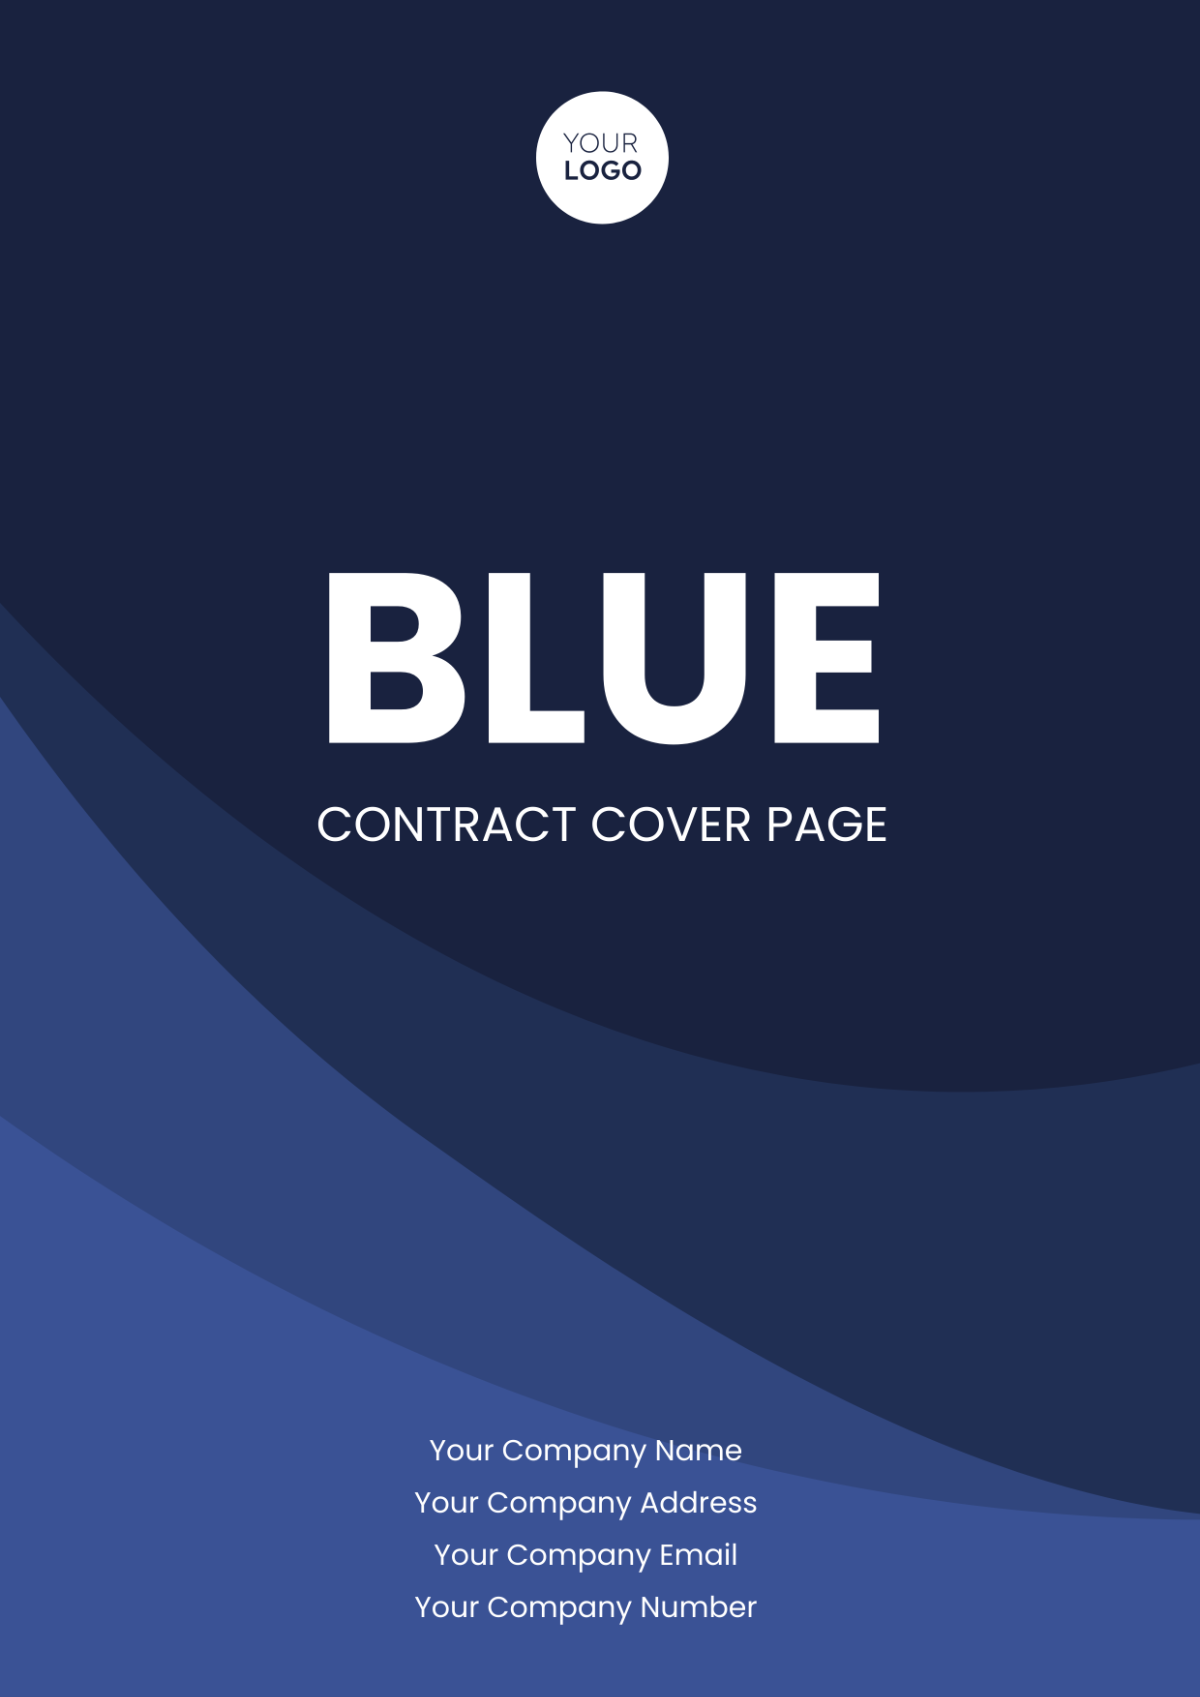 Blue Contract Cover Page